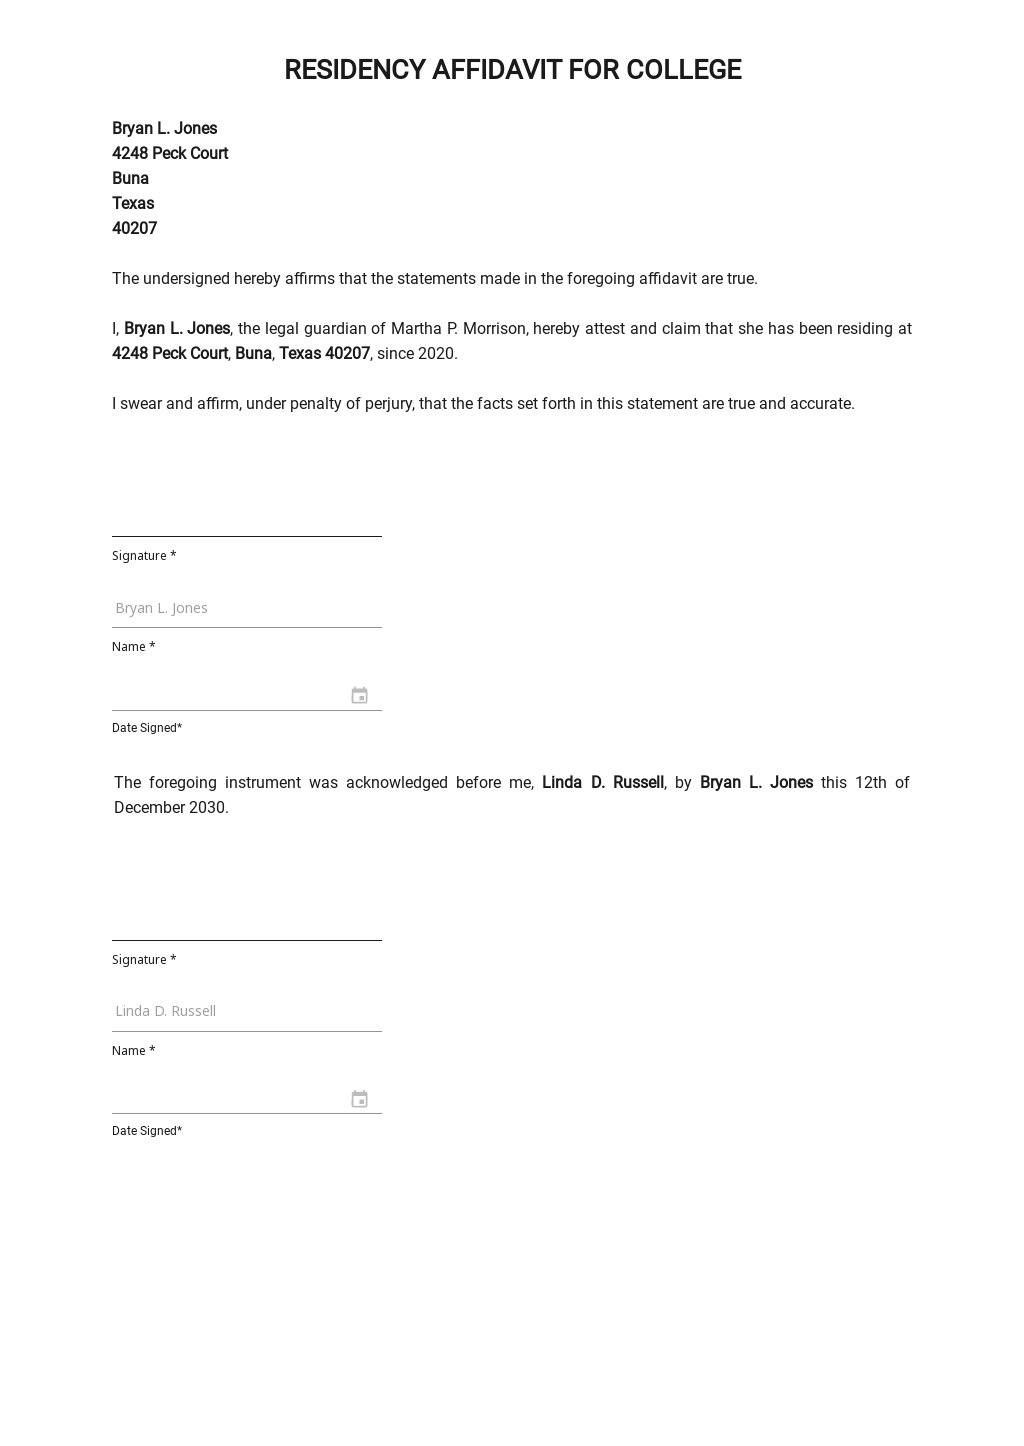 residency-affidavit-for-college-template-google-docs-word-template